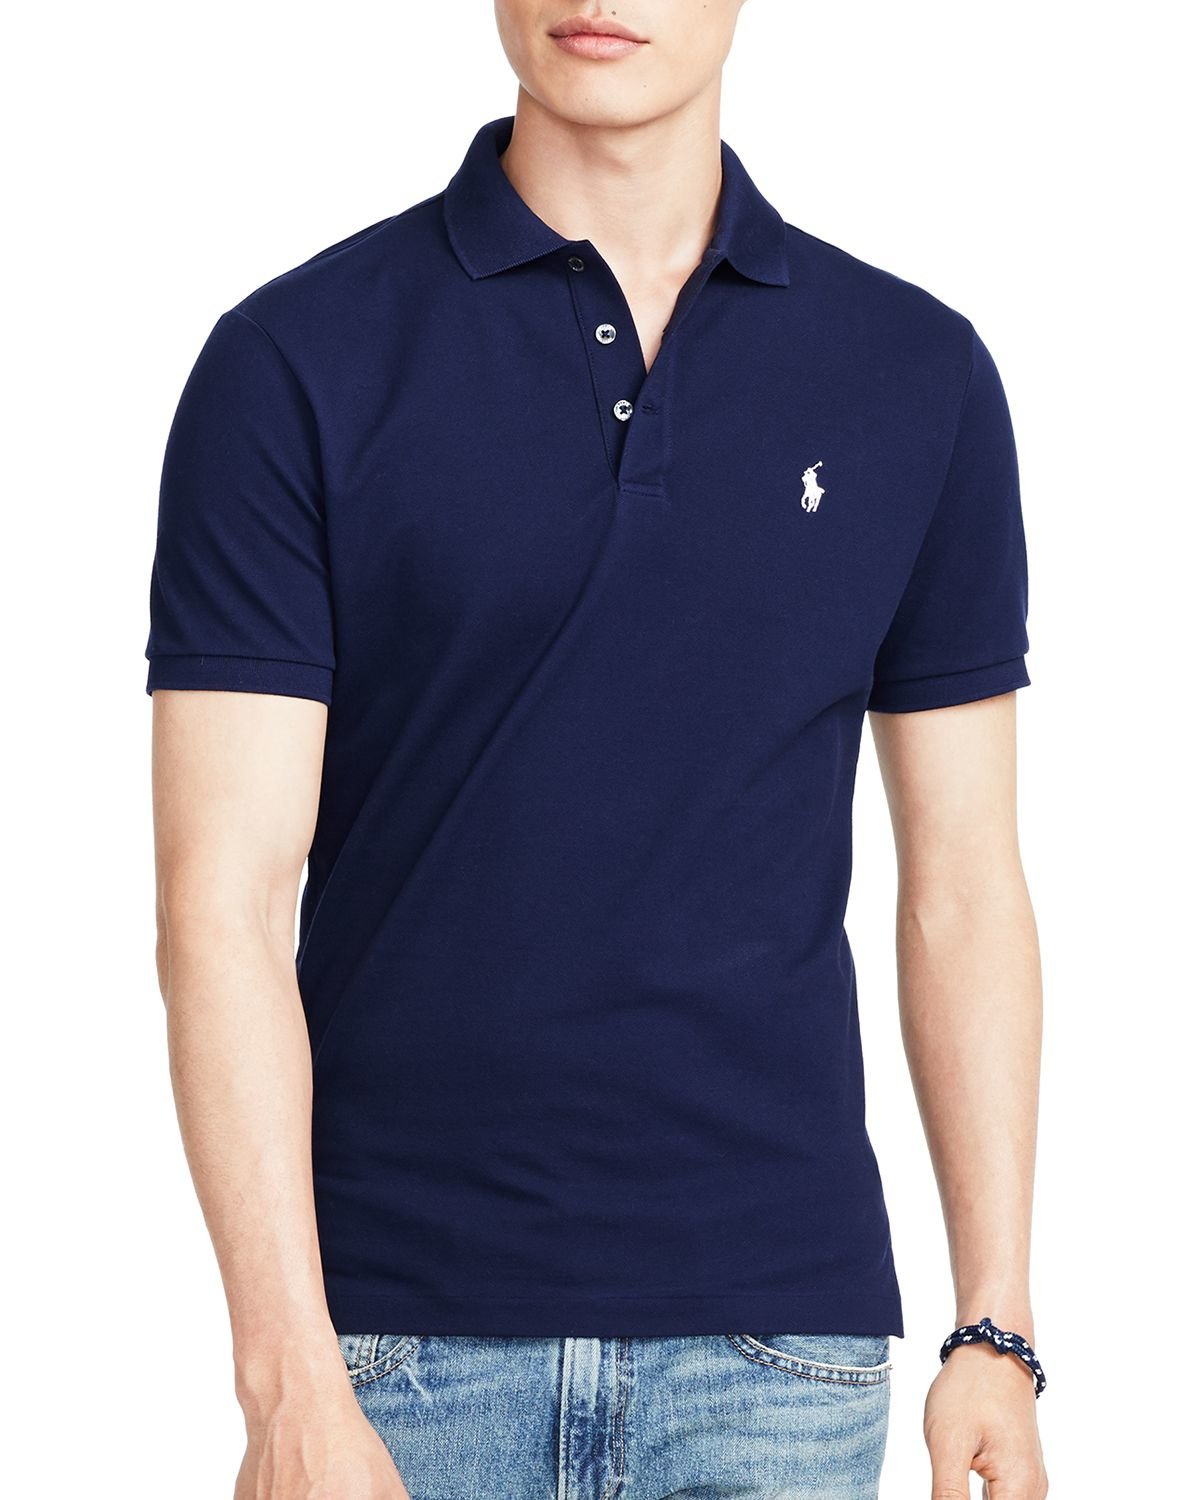 Lyst Ralph Lauren Polo Stretch Mesh Slim Fit Polo Shirt In Blue For Men 